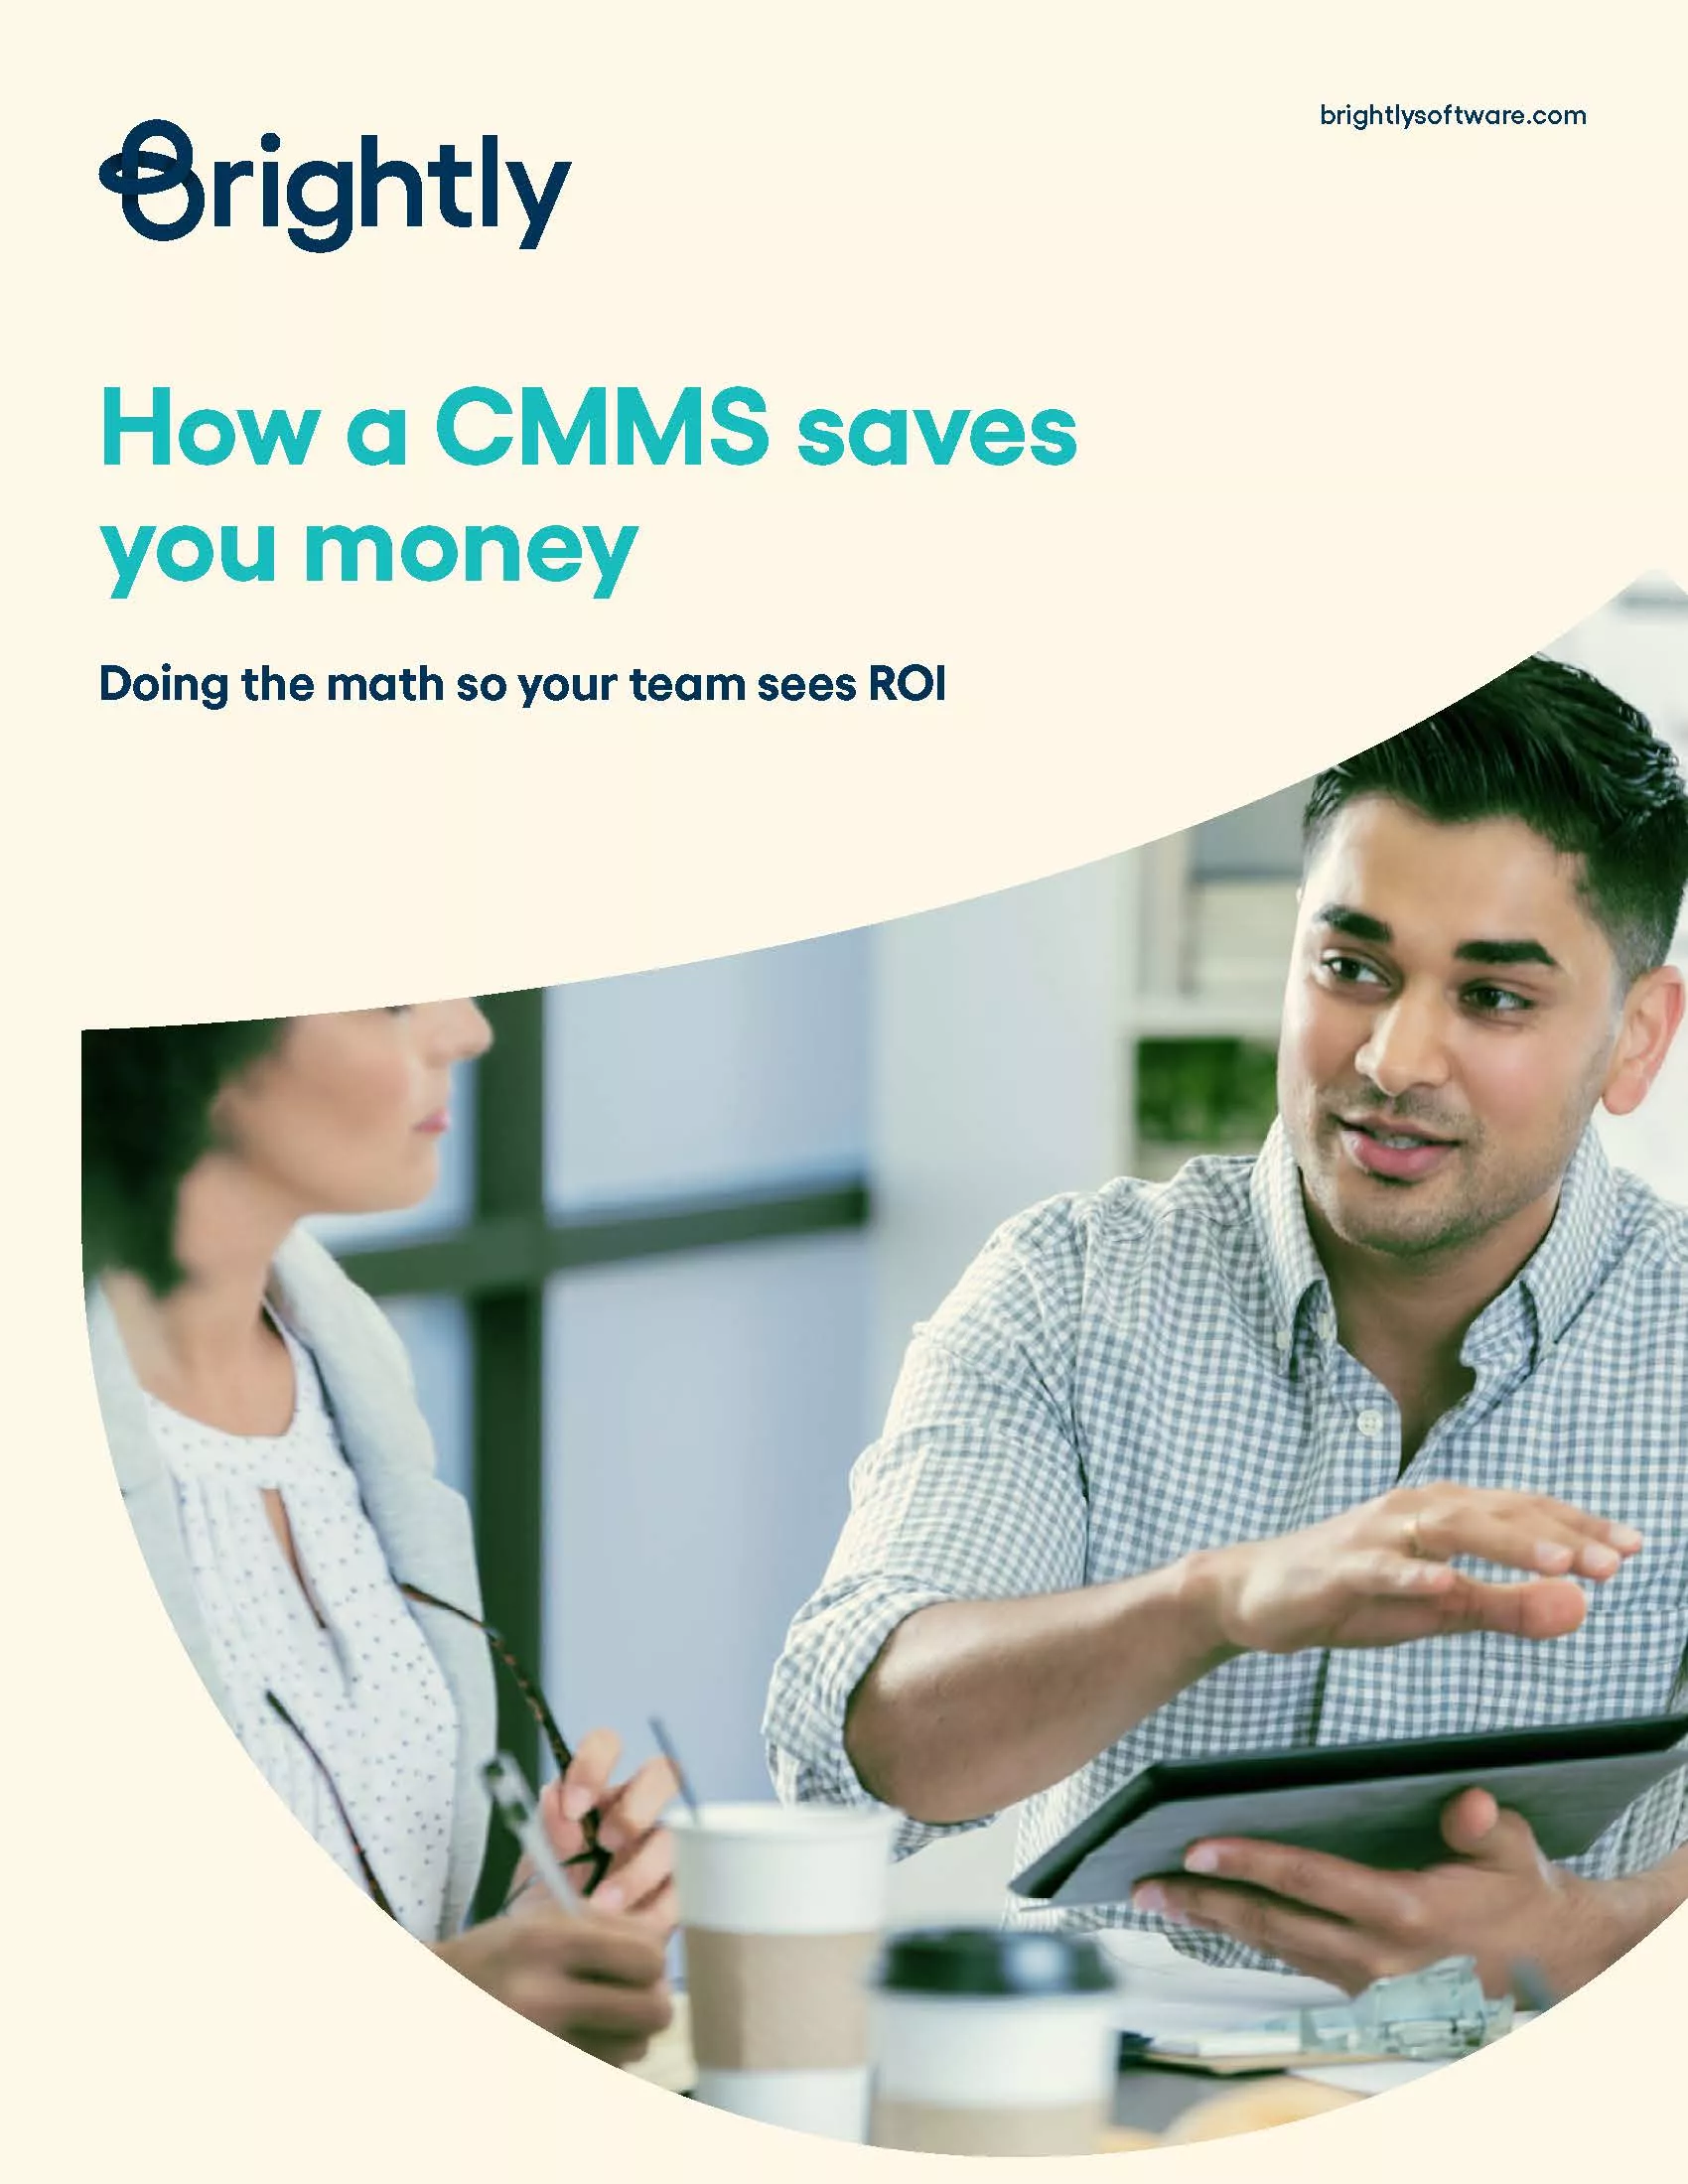 How a CMMS saves you money